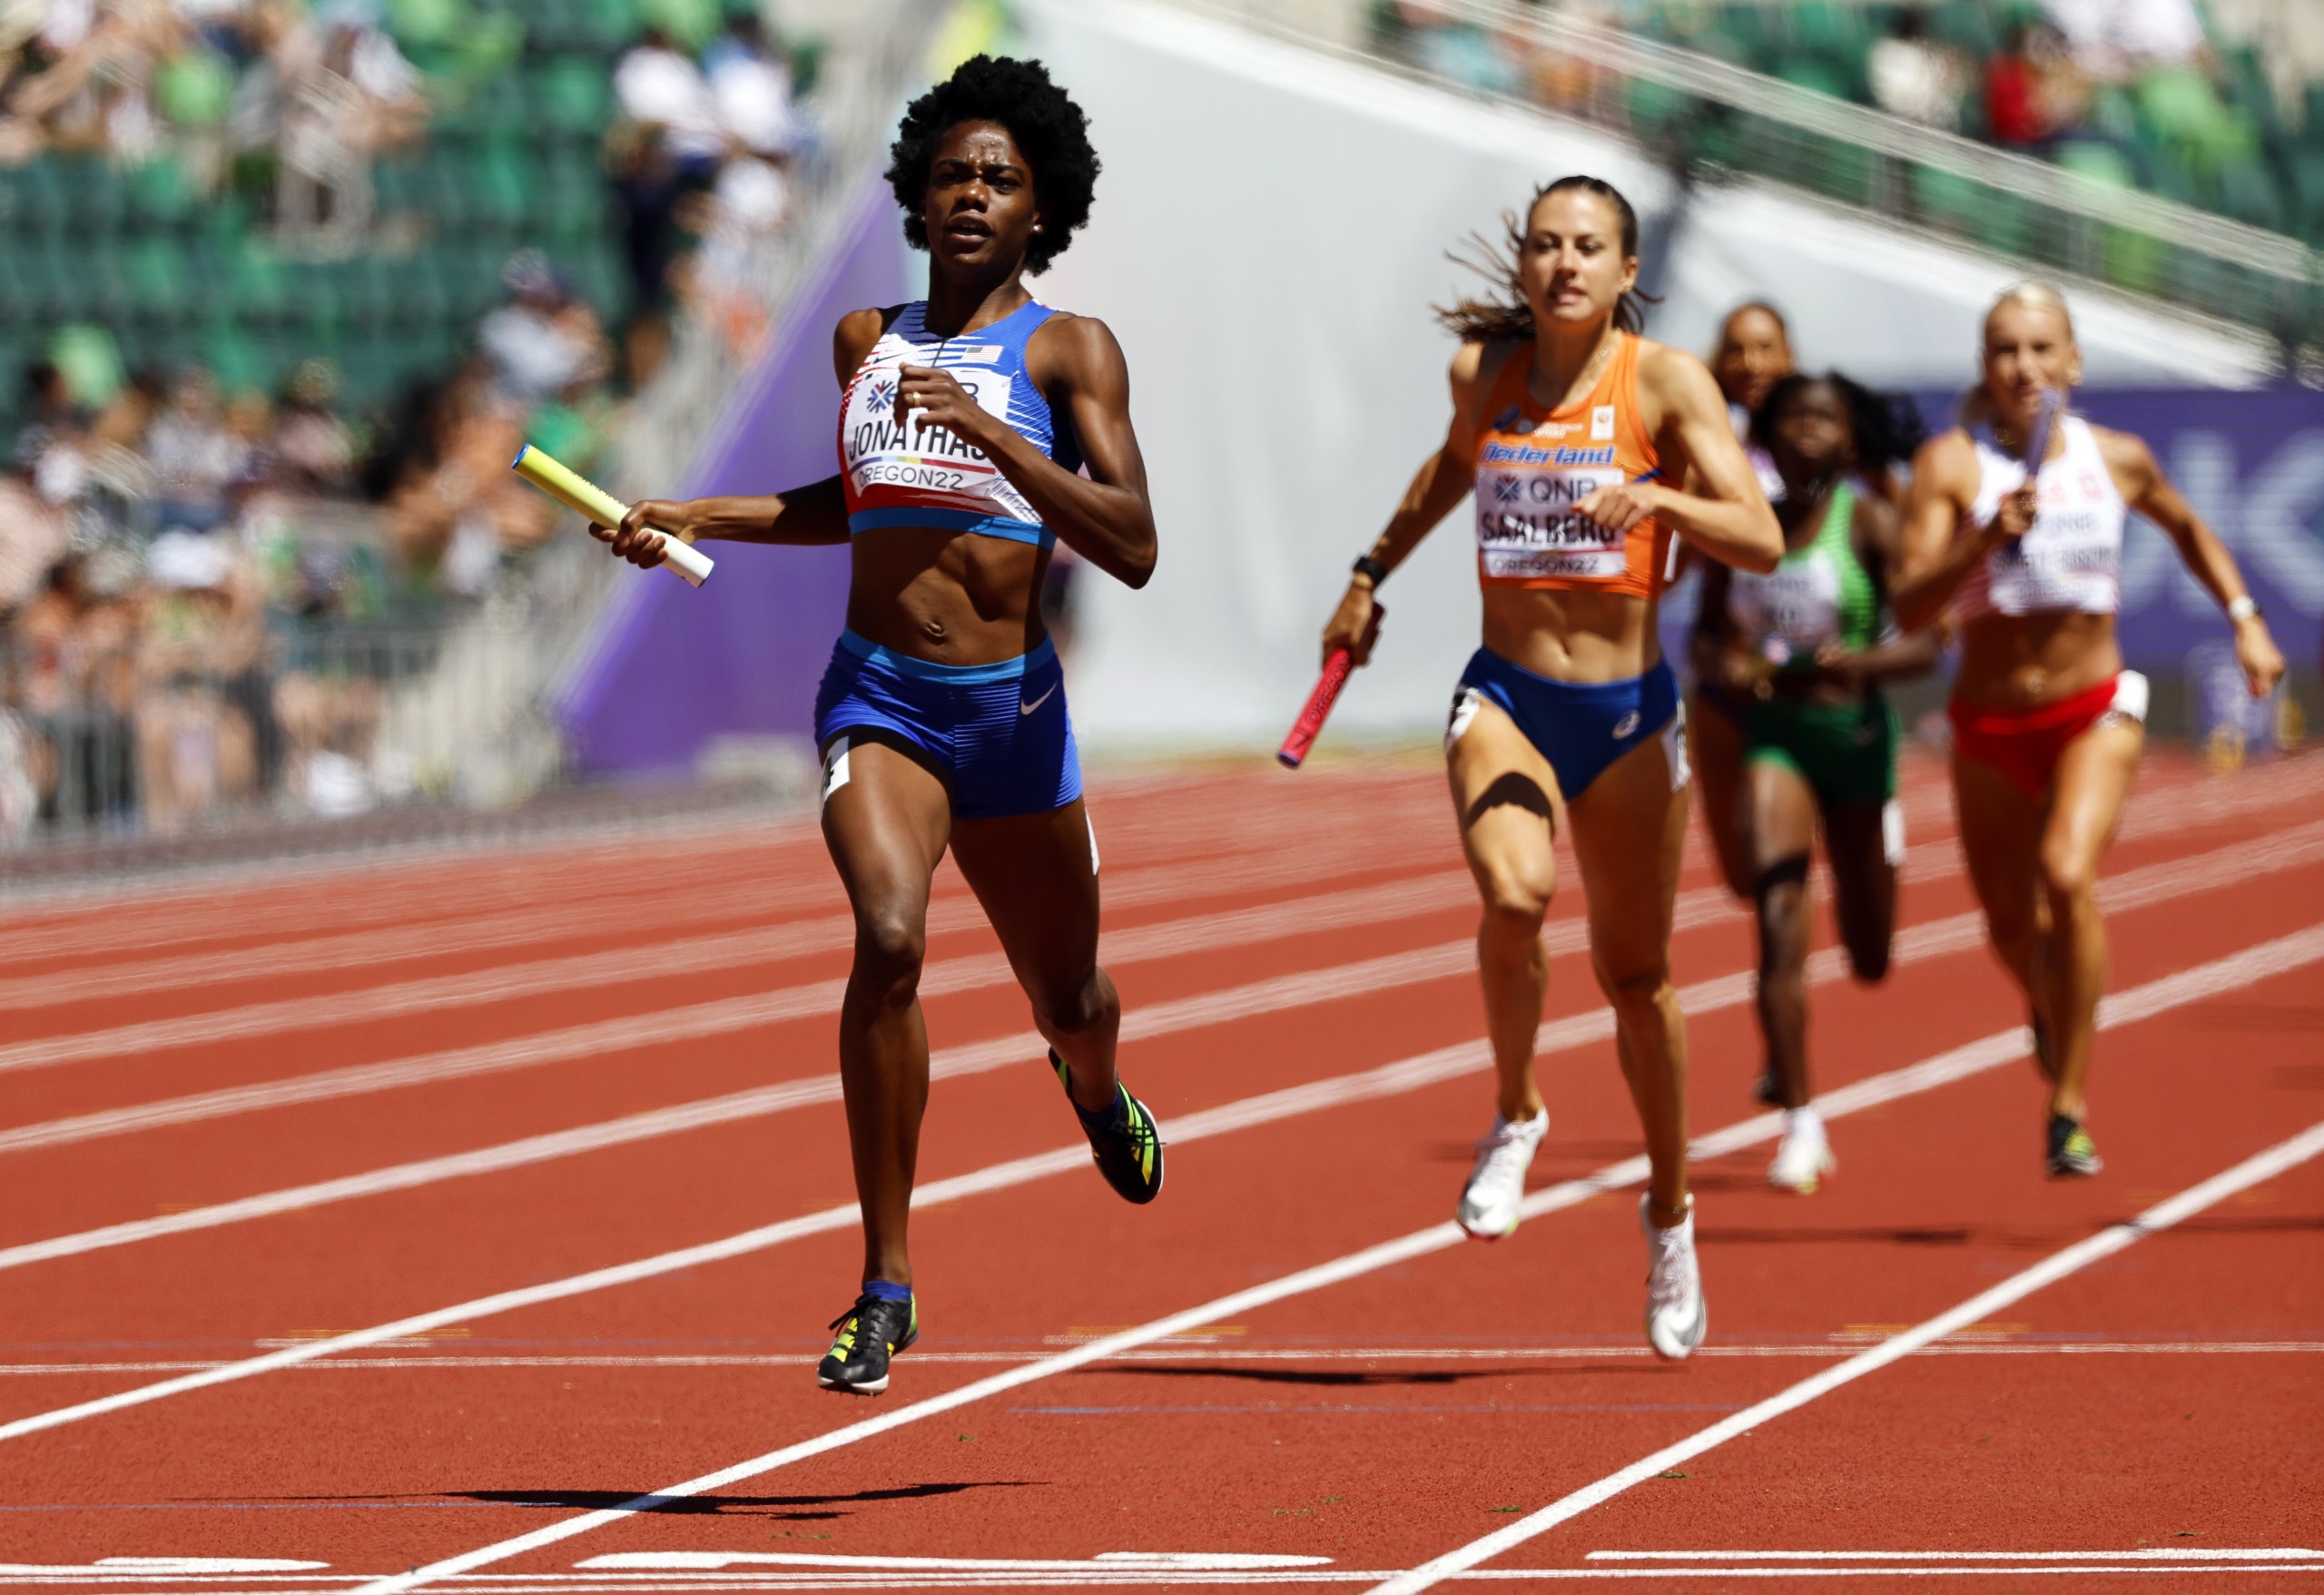 epa10073450 Wadeline Jonathas (L) of the USA crosses the finish line during the 4x400m Mixed Relay heats at the World Athletics Championships Oregon22 at Hayward Field in Eugene, Oregon, USA, 15 July 2022.  EPA/John G. Mabanglo